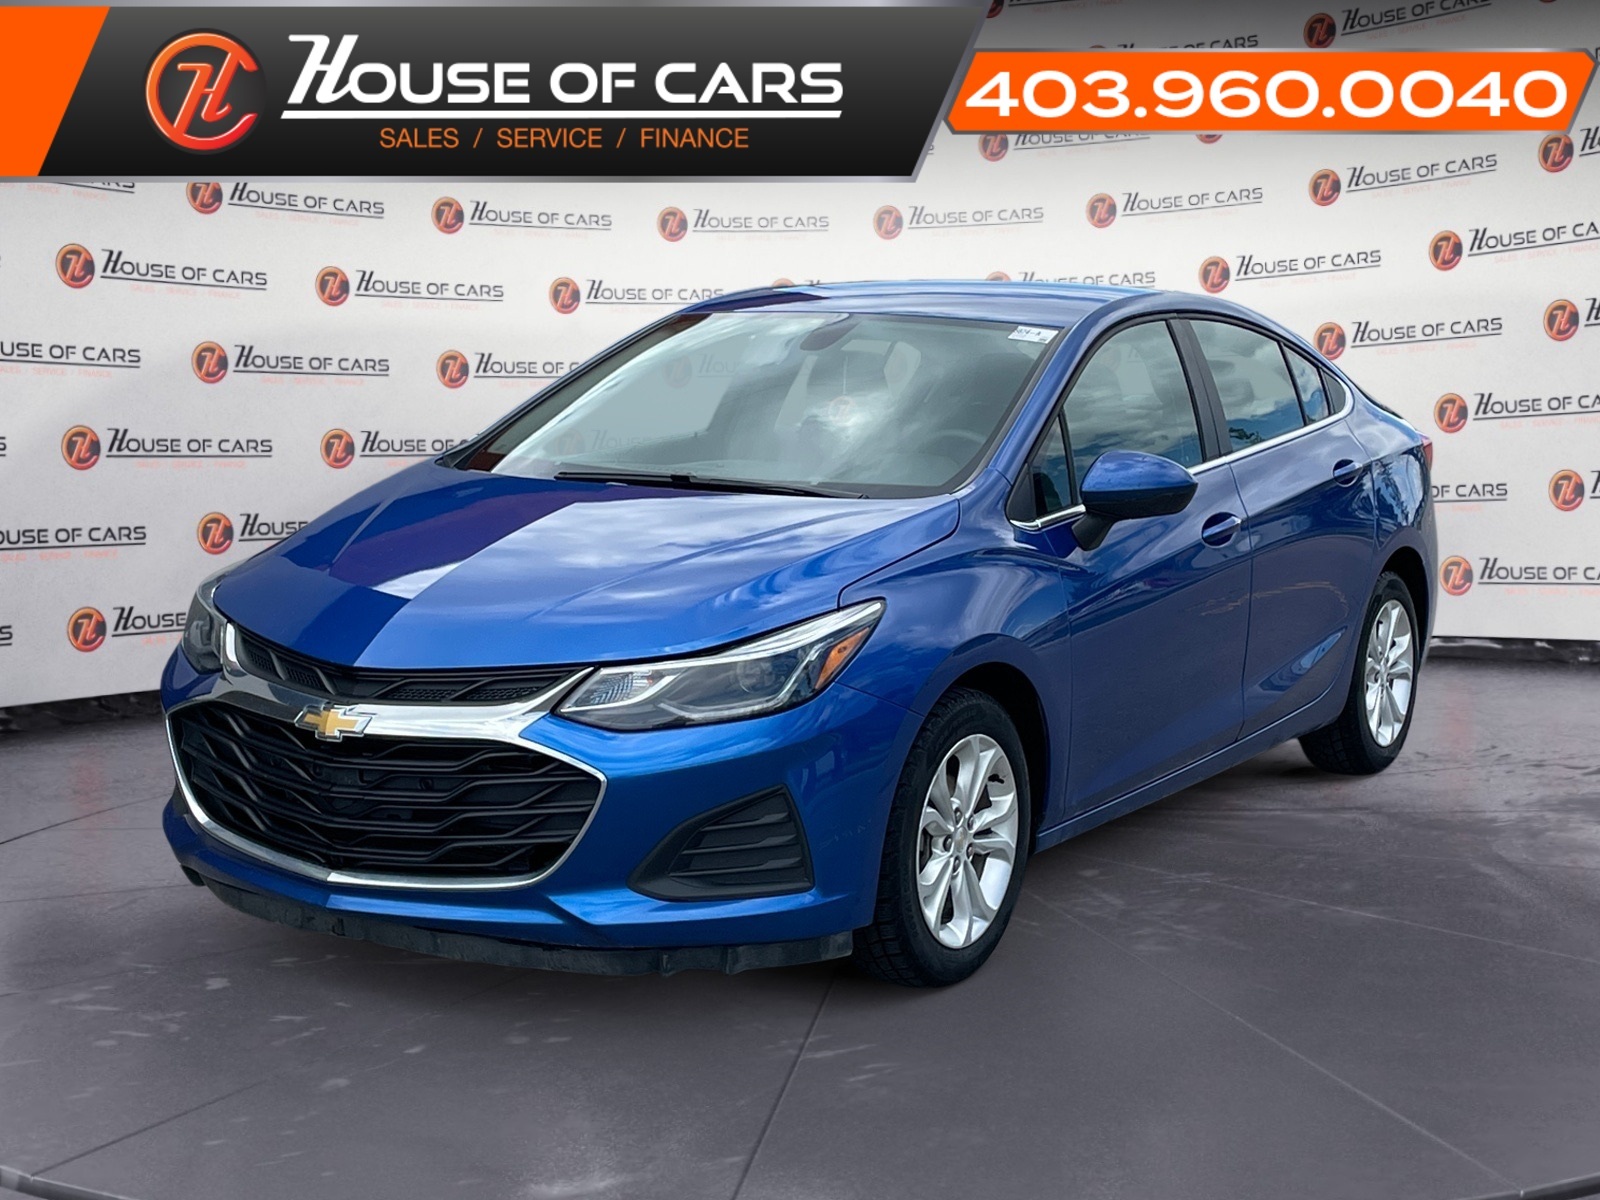 2019 Chevrolet Cruze 4dr Sdn LT w-1LT/ Powered Seats/ Cruise Control